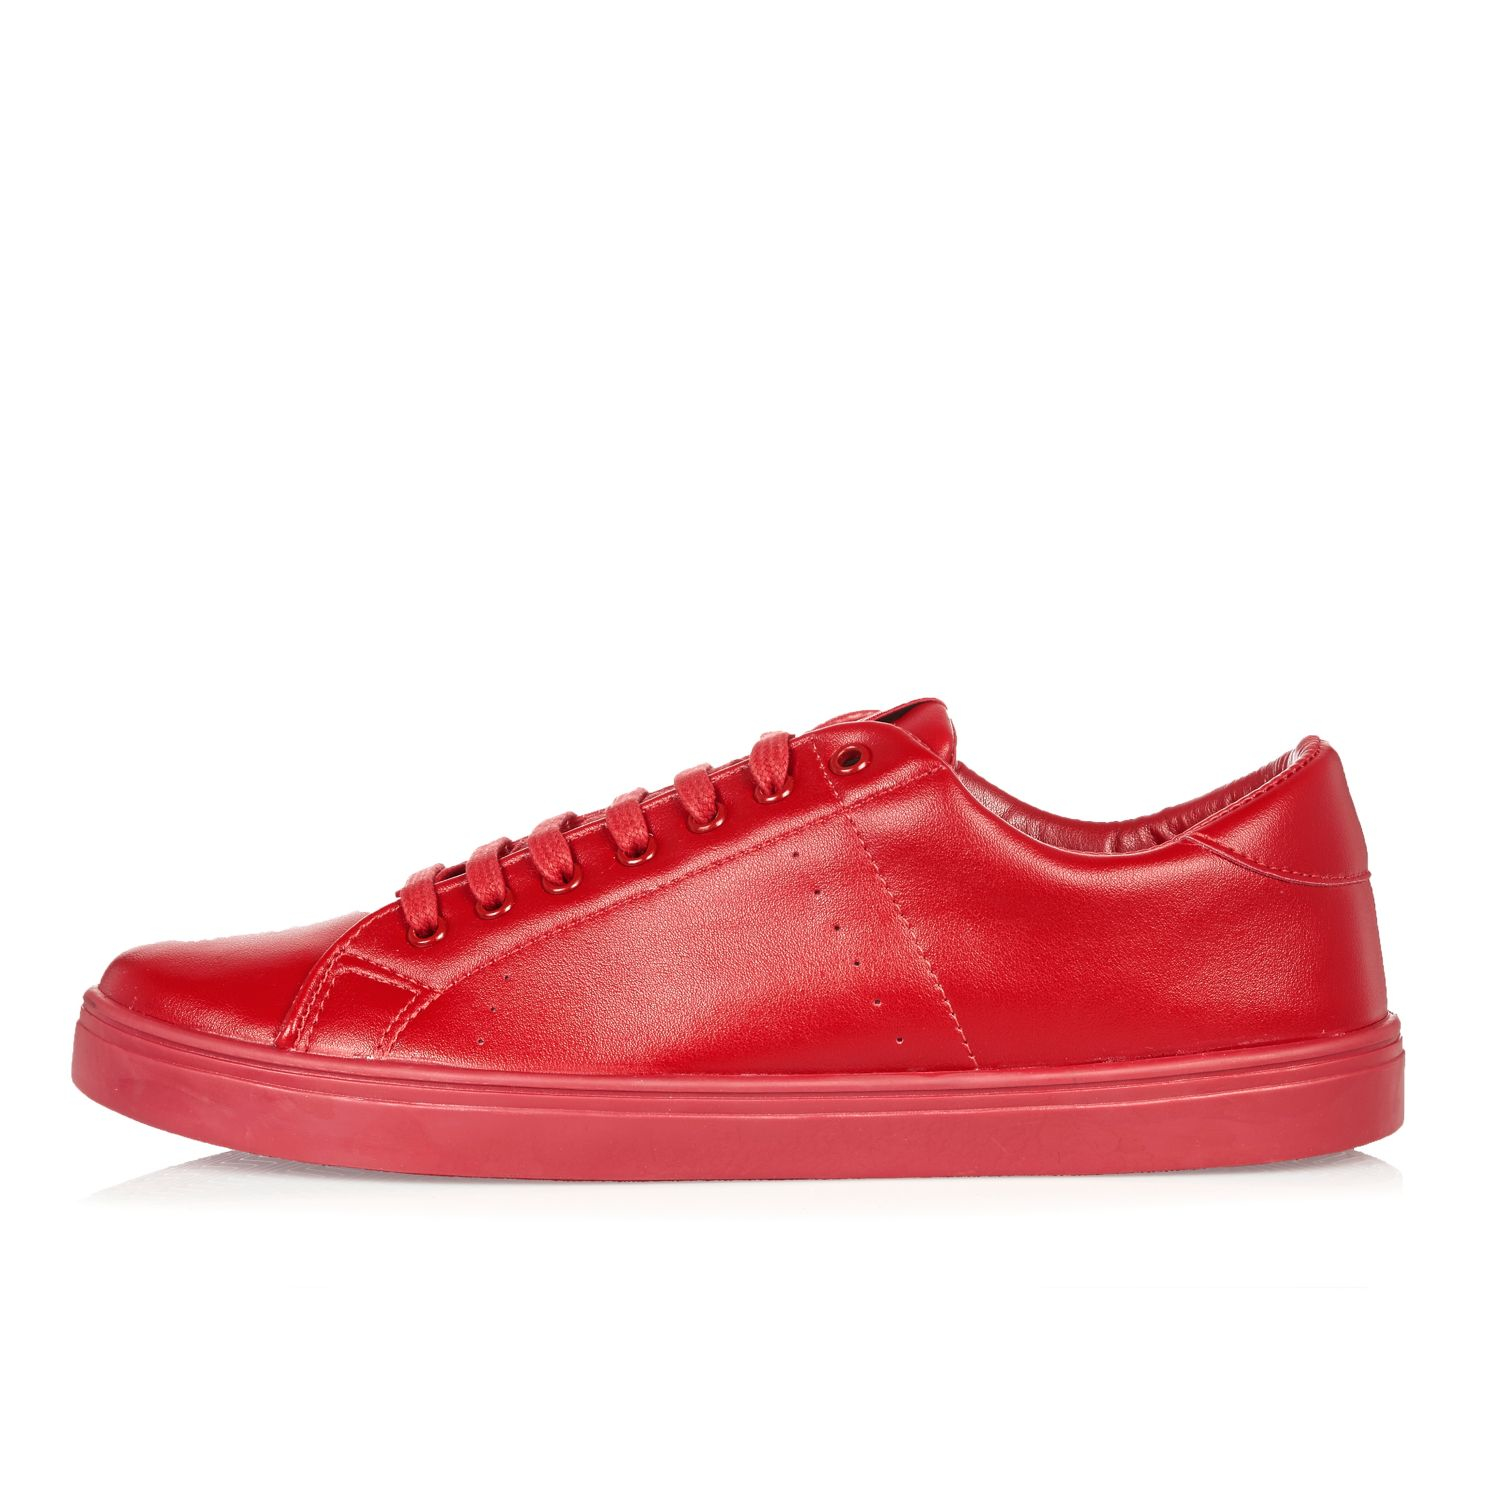 River Island Rubber Red Tonal Trainers for Men - Lyst